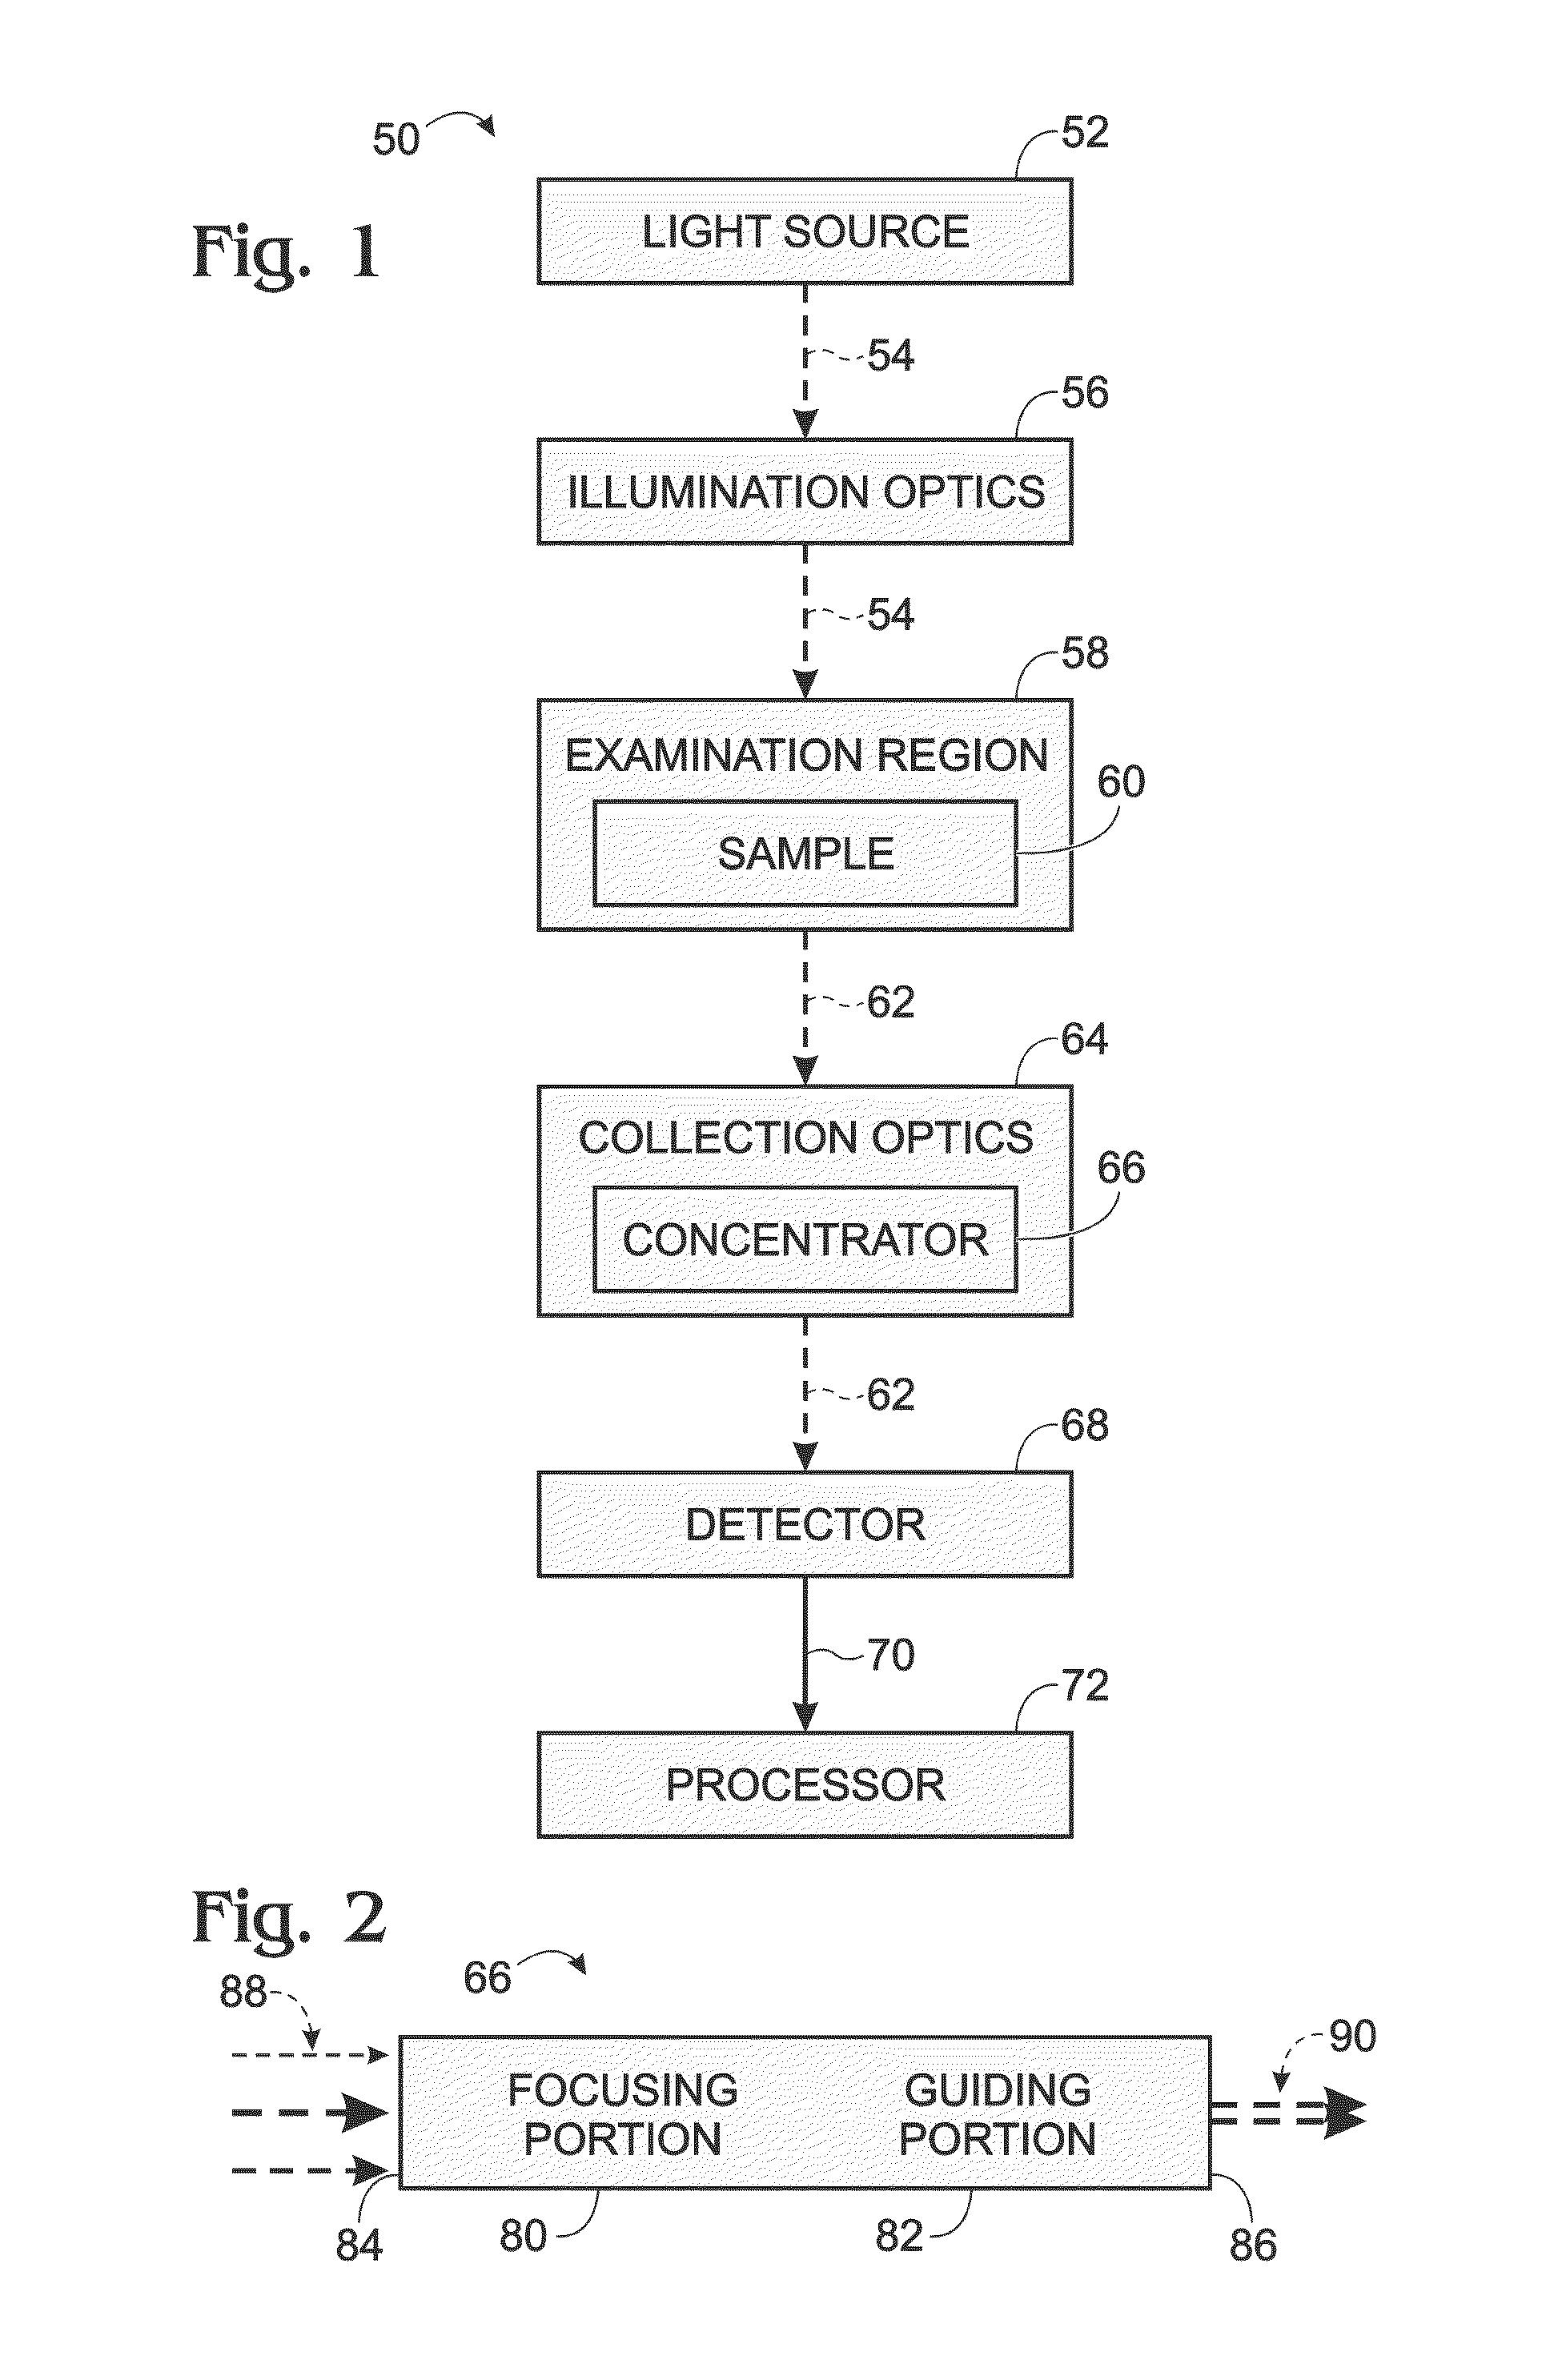 Detection system with one-piece optical element to concentrate and homogenize light